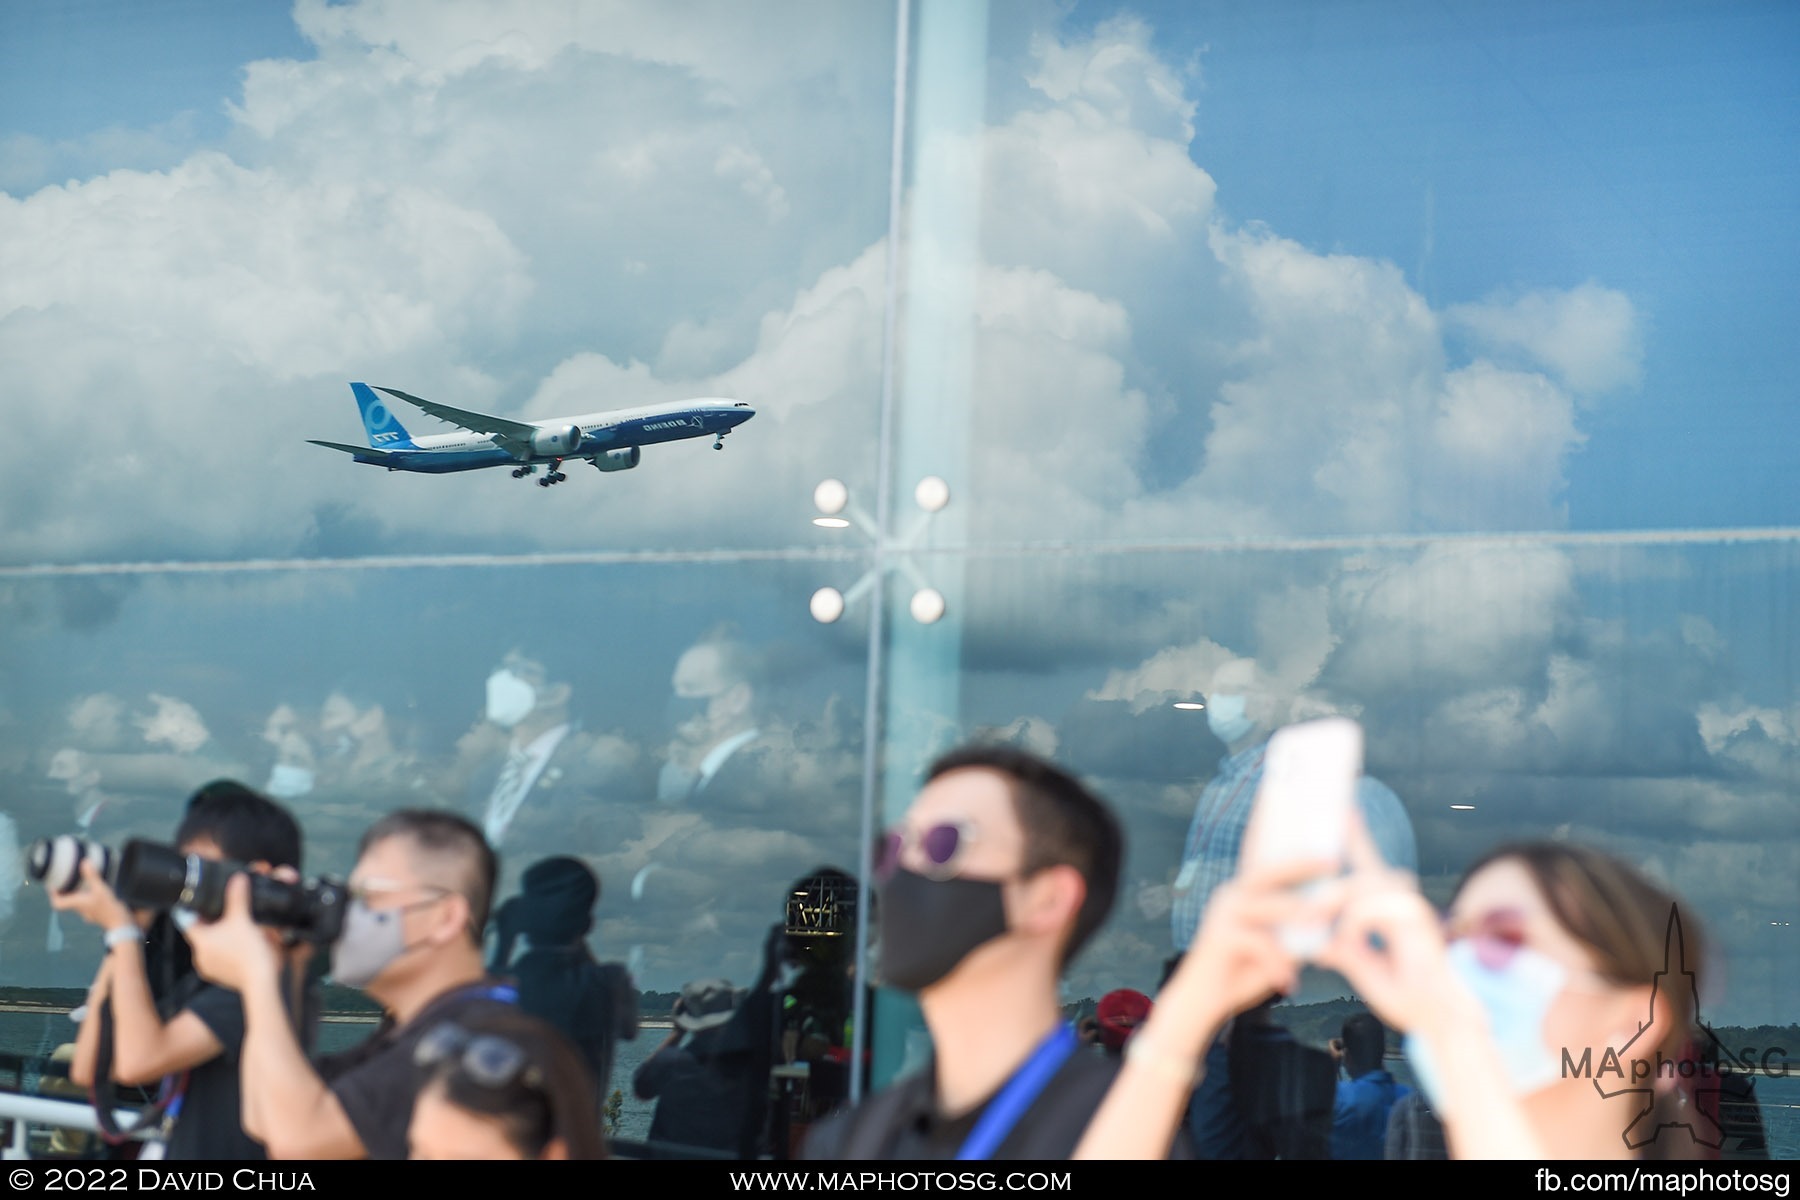 Spectators enjoying the flying display of the Boeing 777X